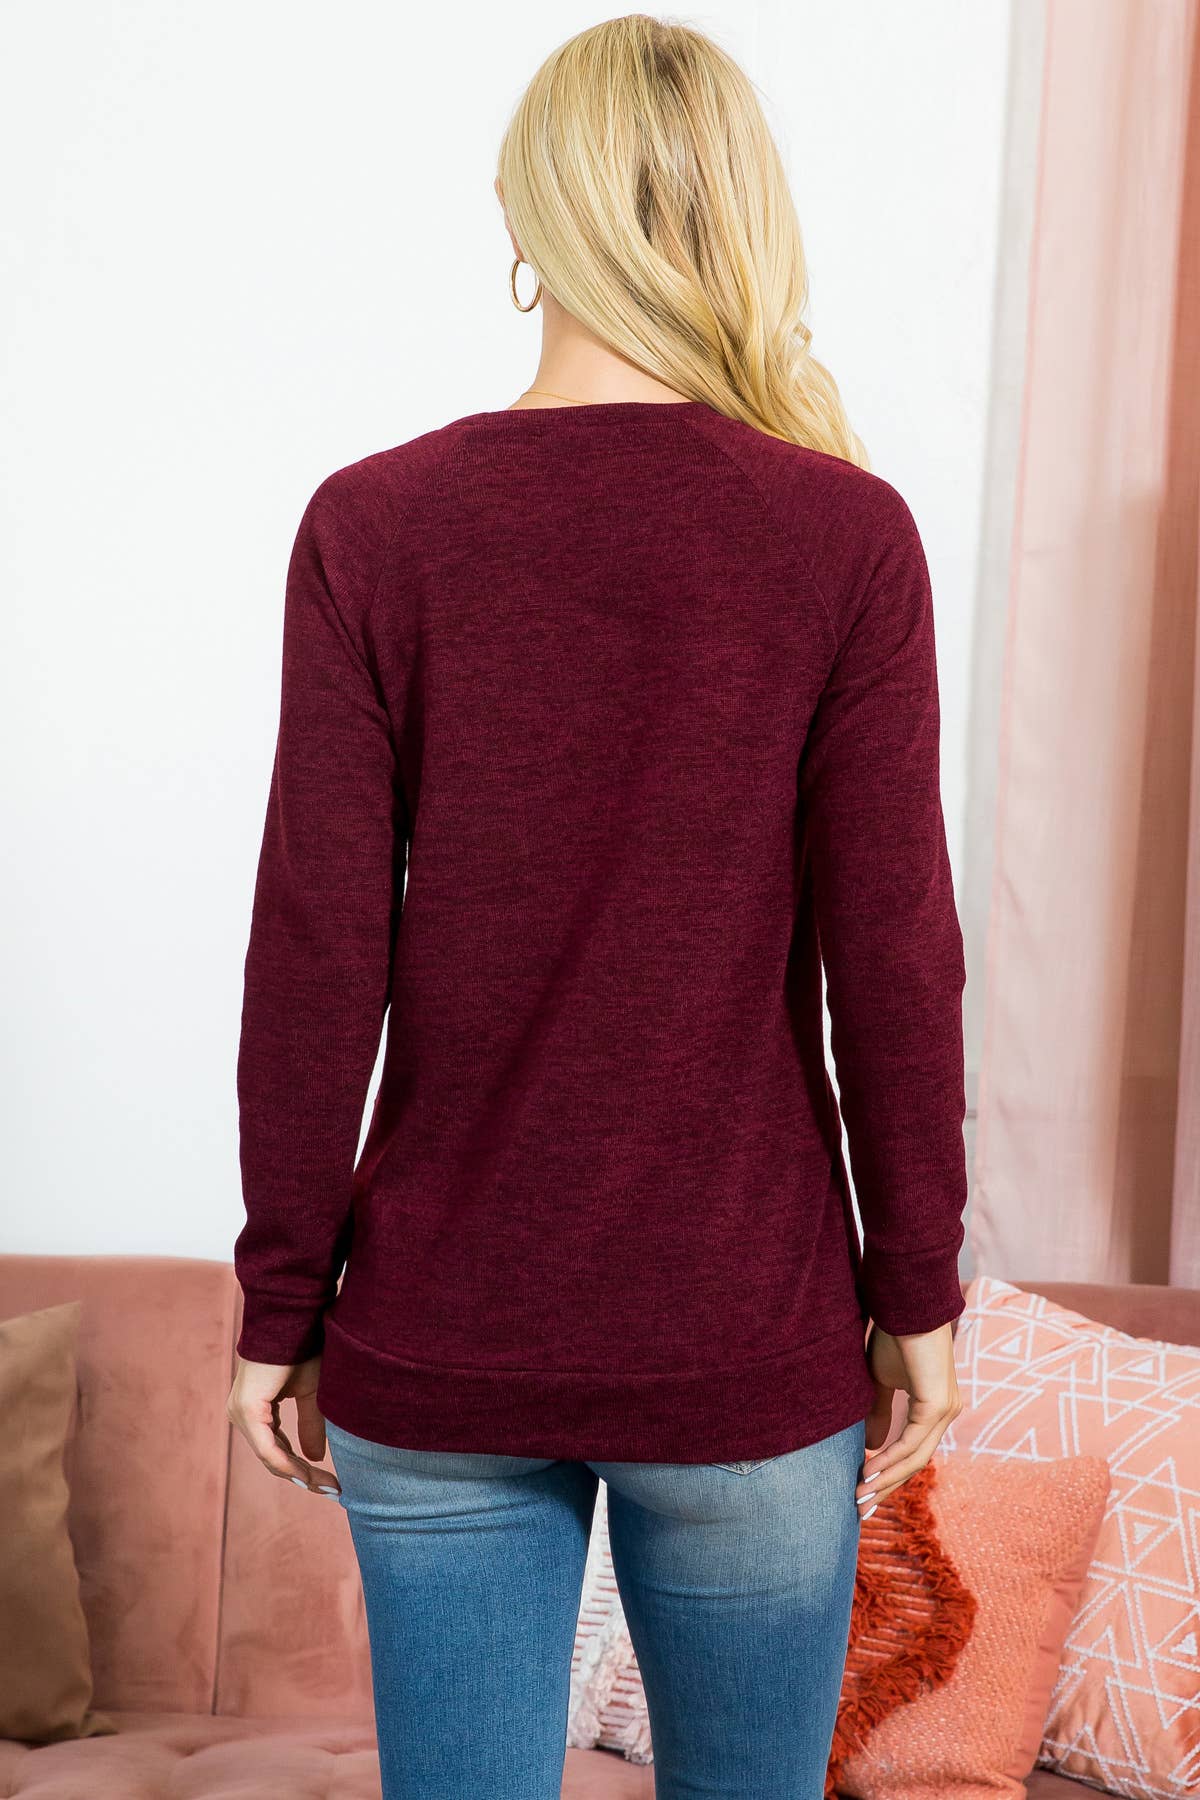 YMT20078V-KNIT FRONT POCKET LONG SLEEVED TOP: XL / Rust